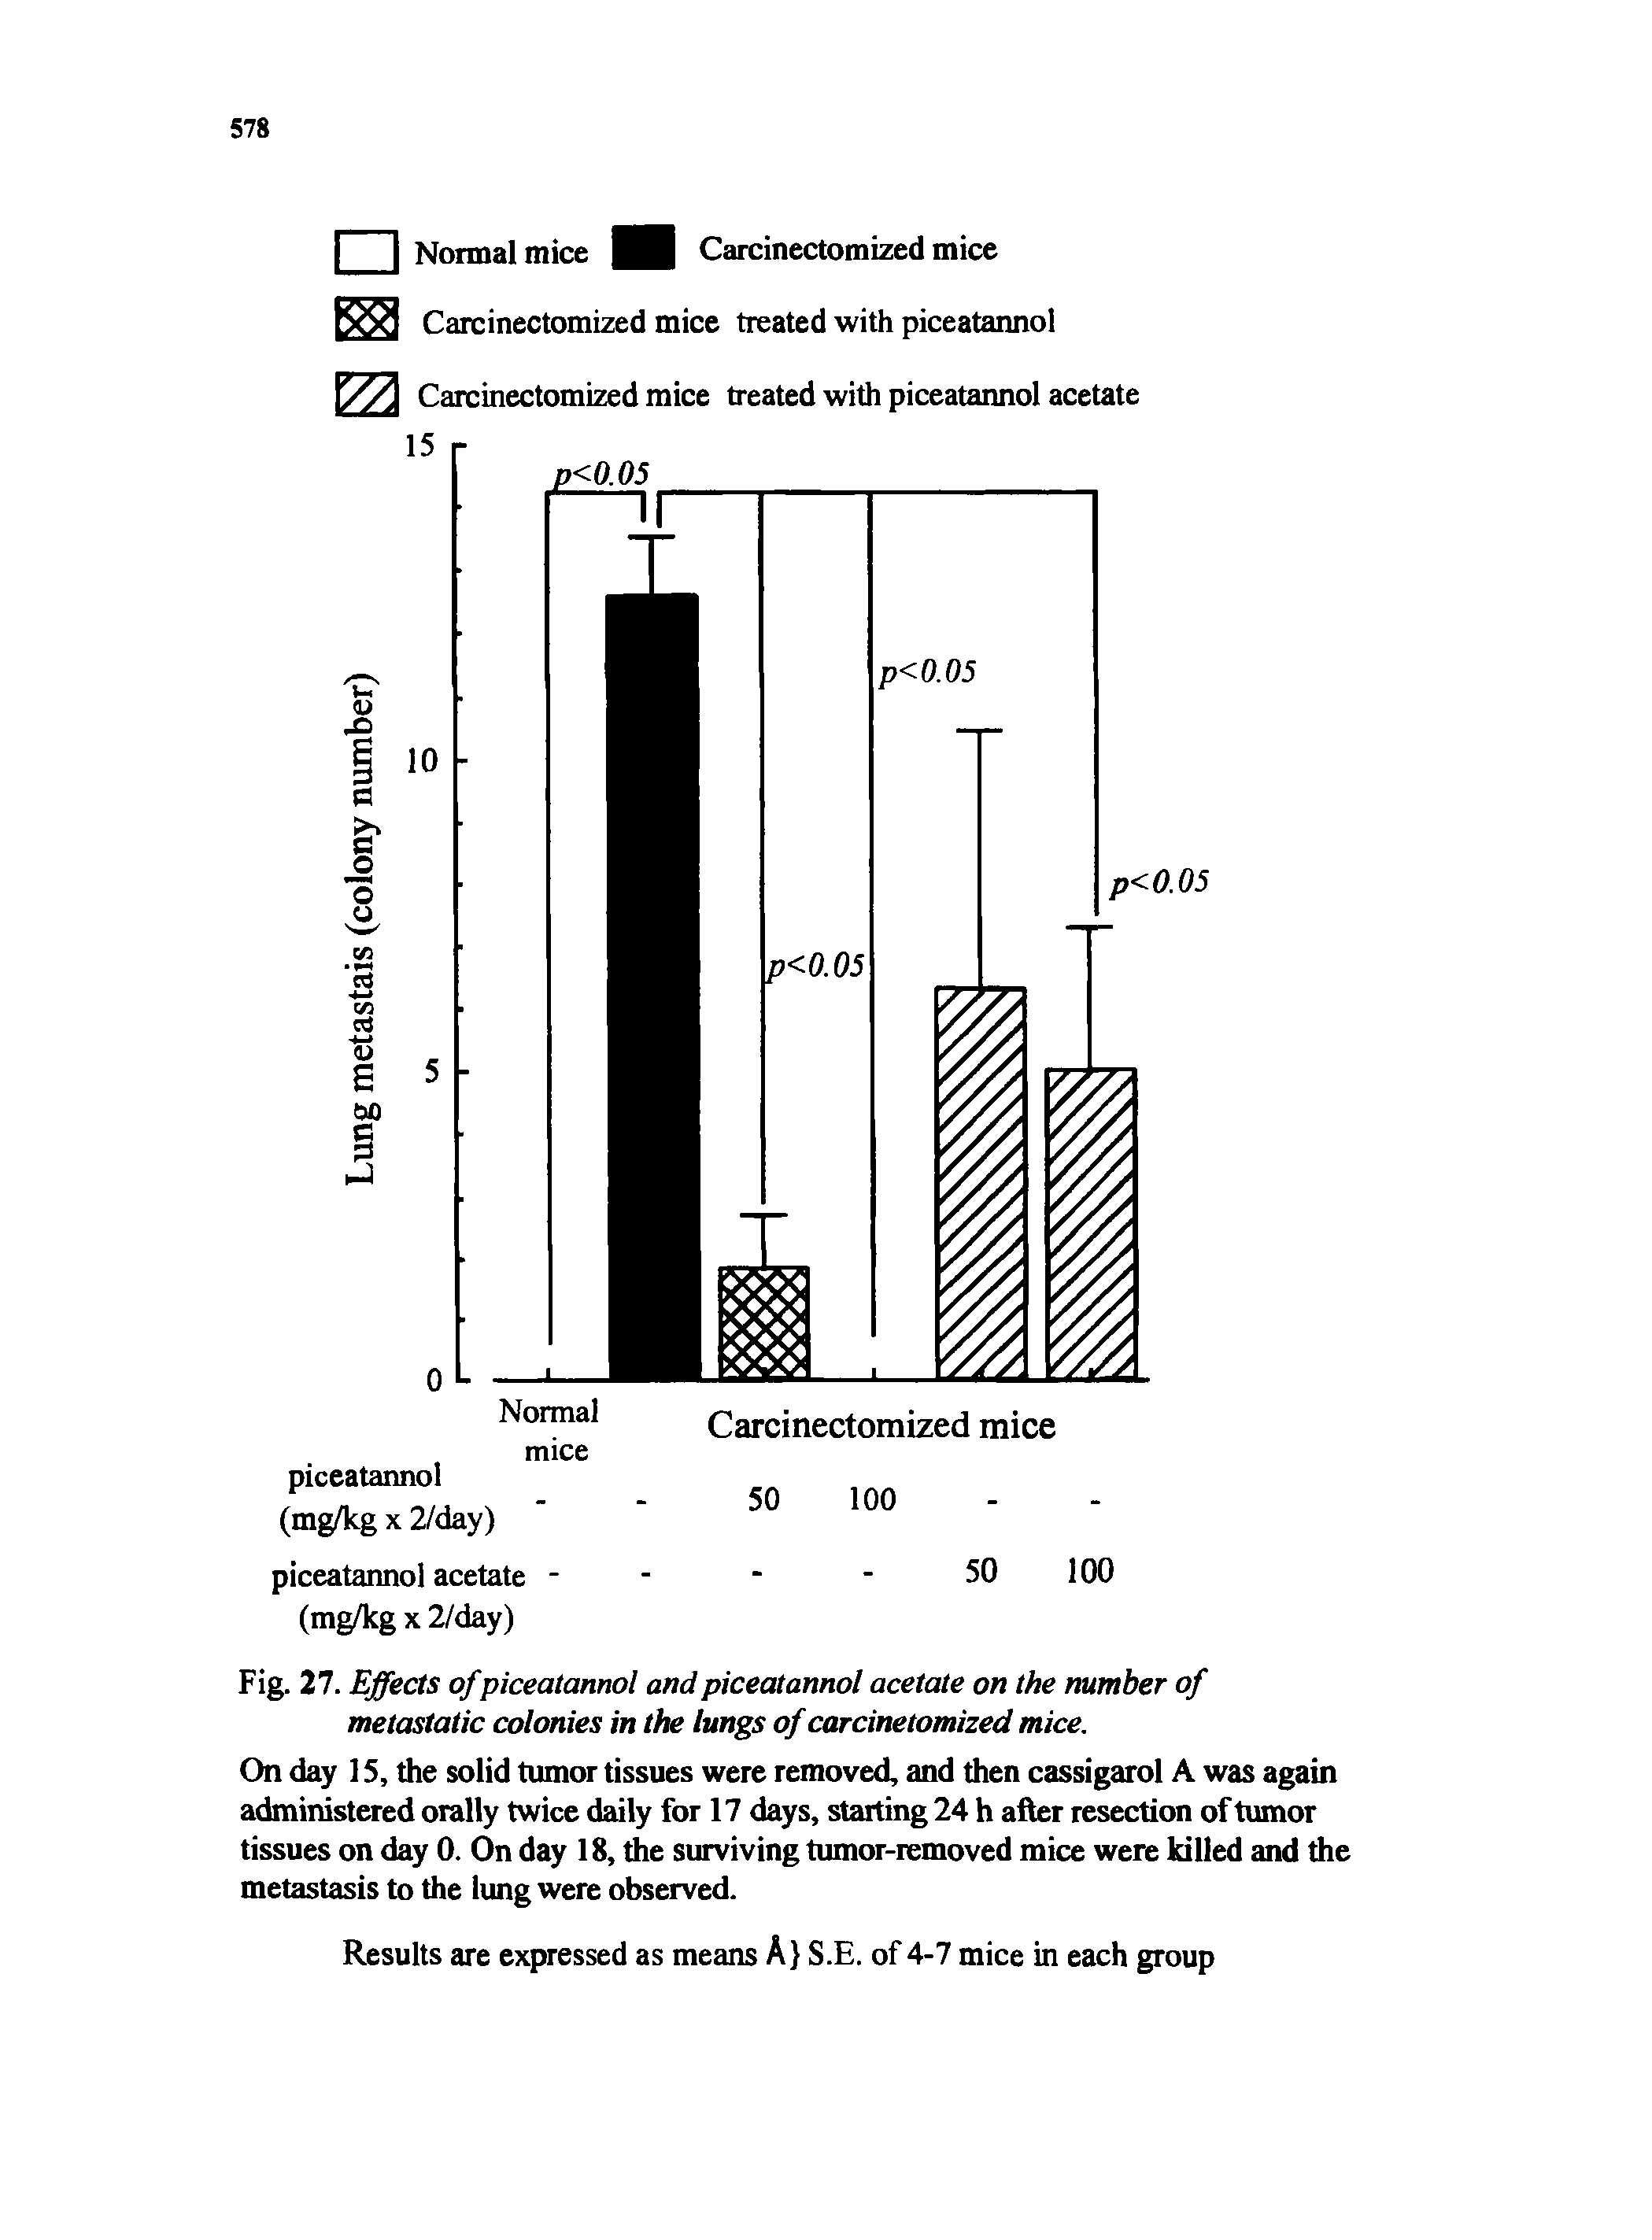 Fig. 27. Effects of piceatannol and piceatannol acetate on the number of metastatic colonies in the lungs of carcinetomized mice.